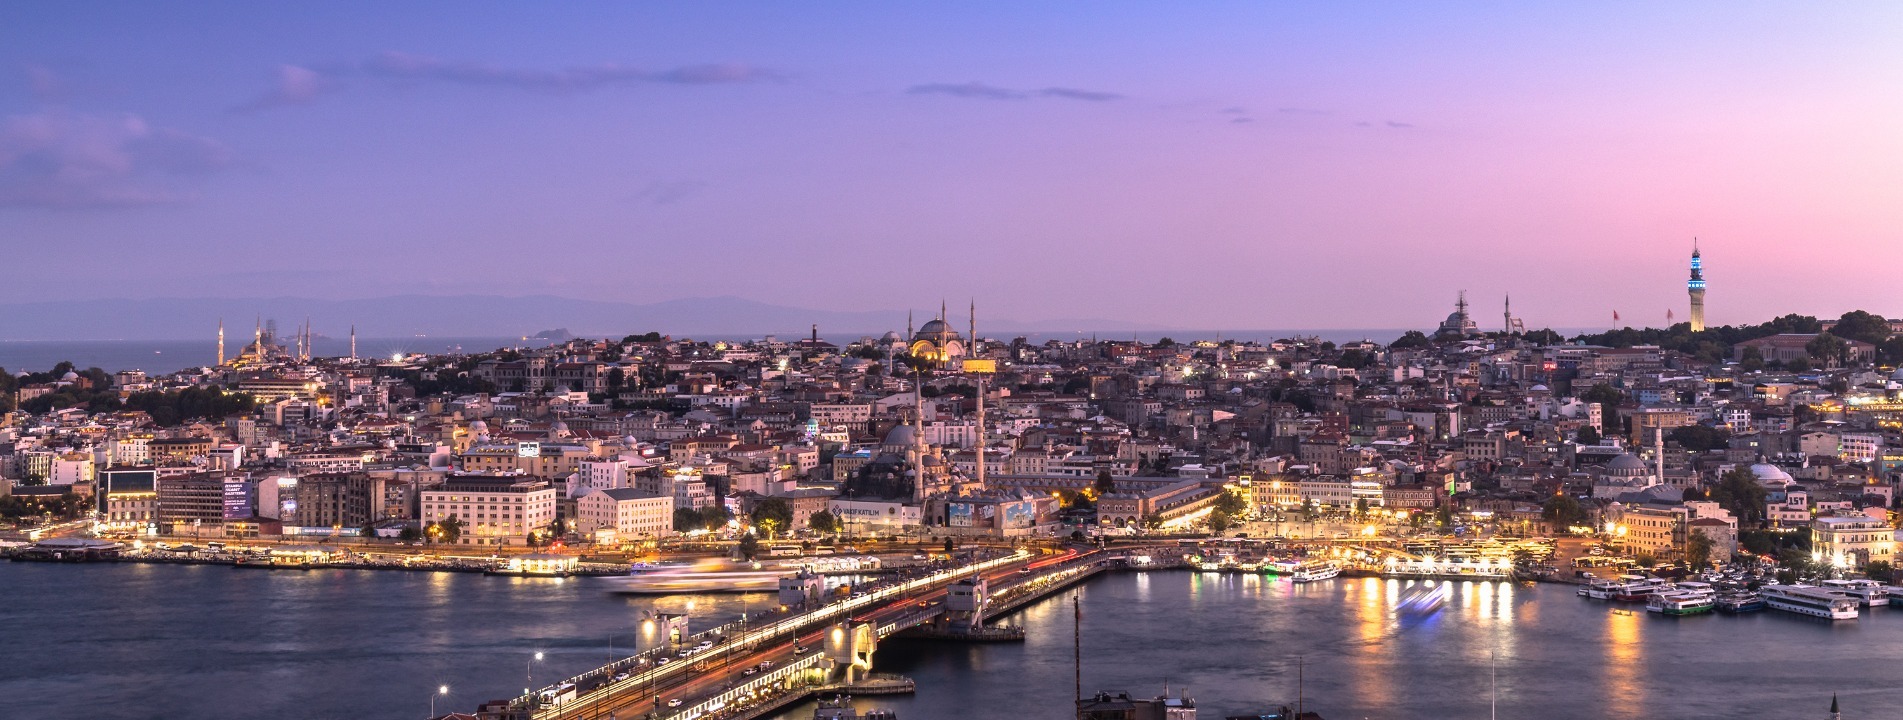 Top 9 Things You Should Know Before Visiting Istanbul